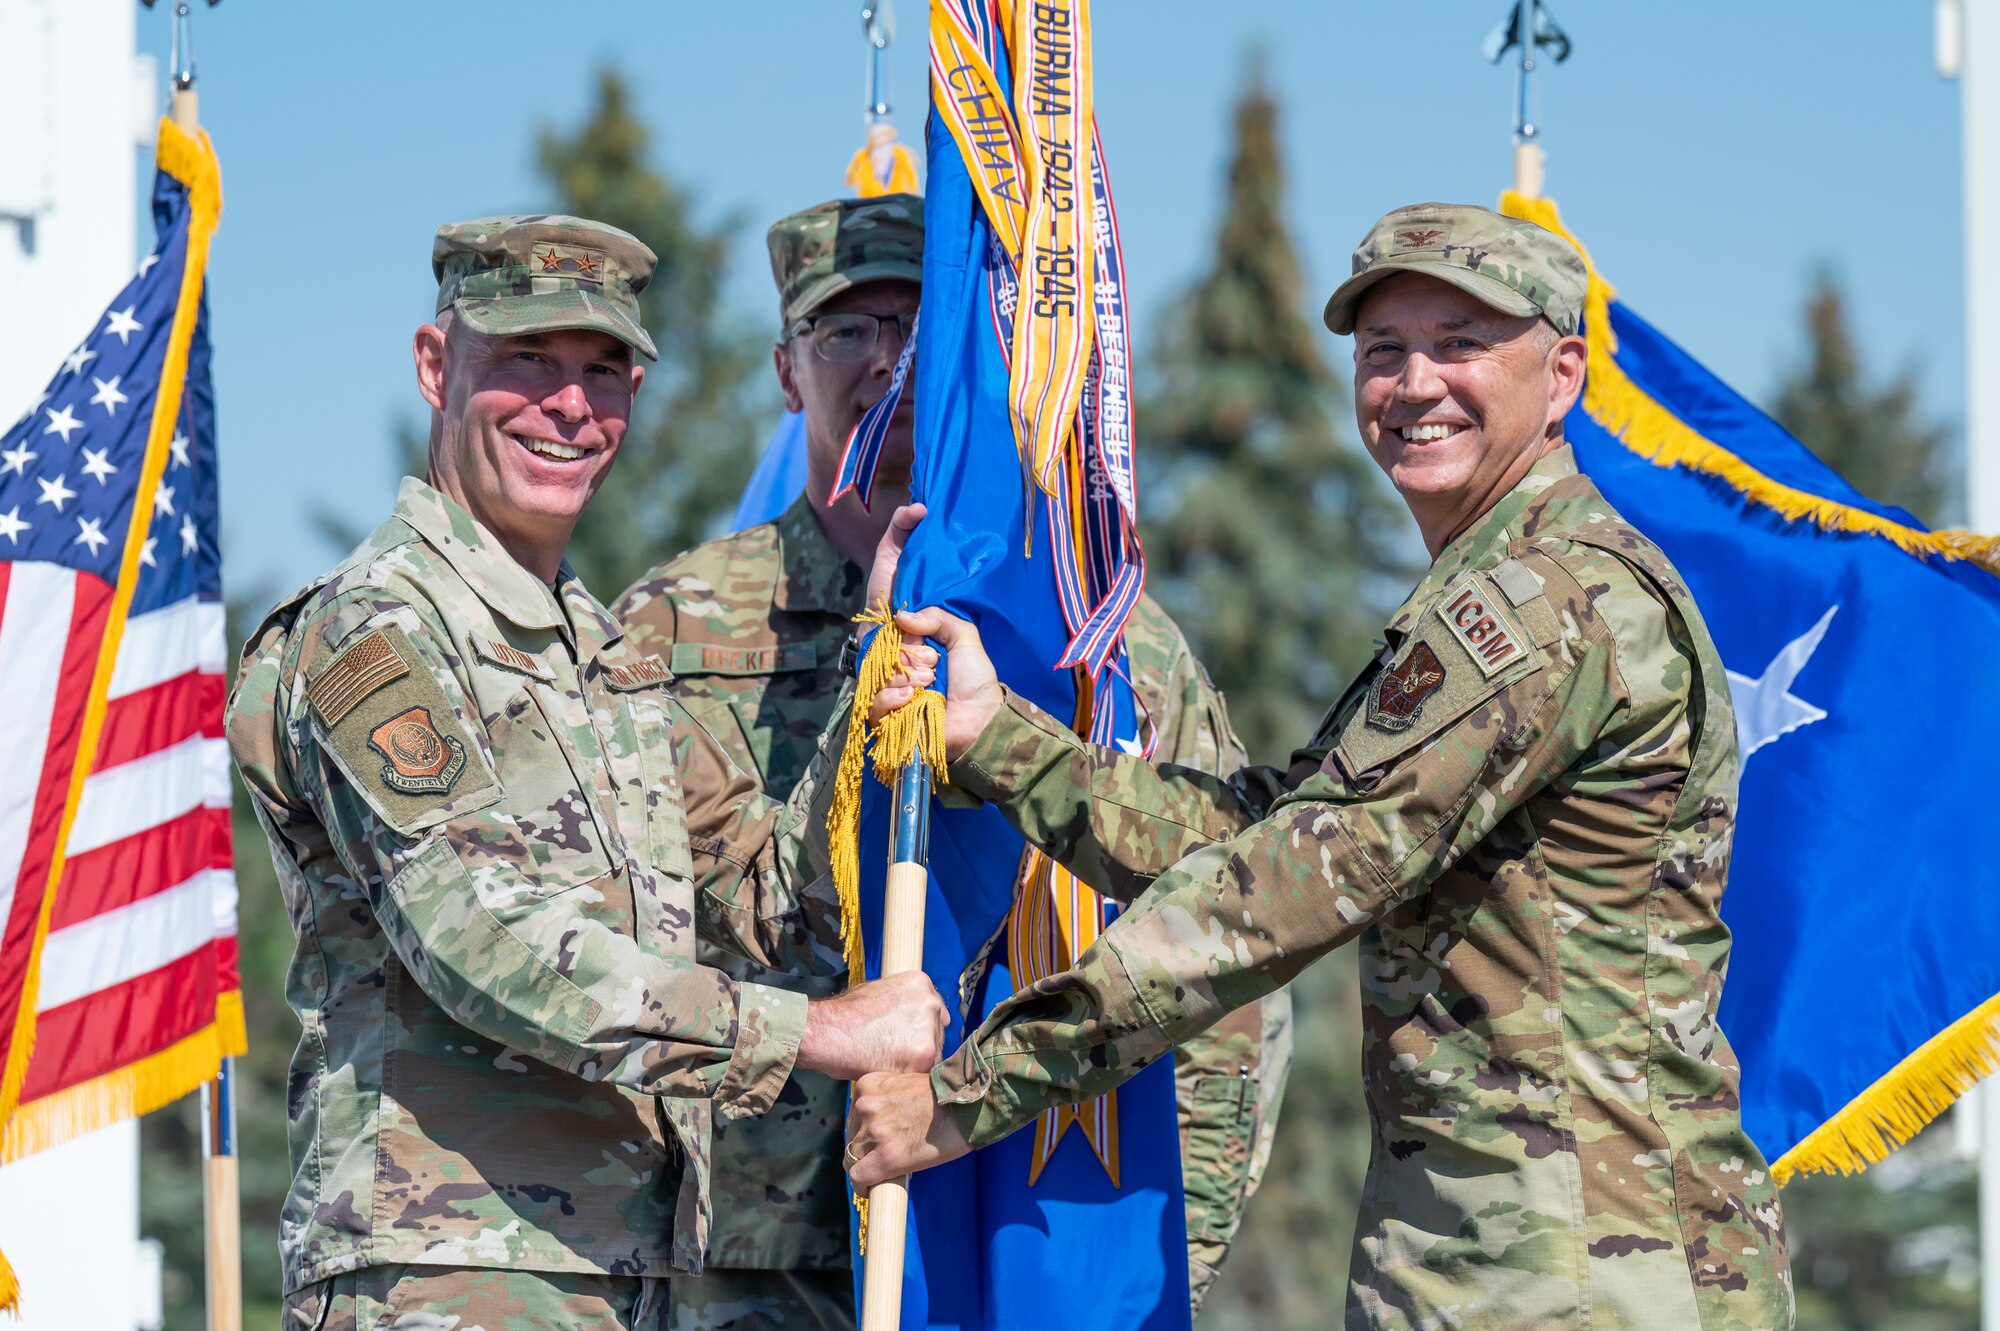 Col. Barry Little, right, accepts the 341st Missile Wing guidon from Maj. Gen. Michael Lutton, left, 20th Air Force commander, during a change of command ceremony July 18, 2022, at Malmstrom Air Force Base, Mont.